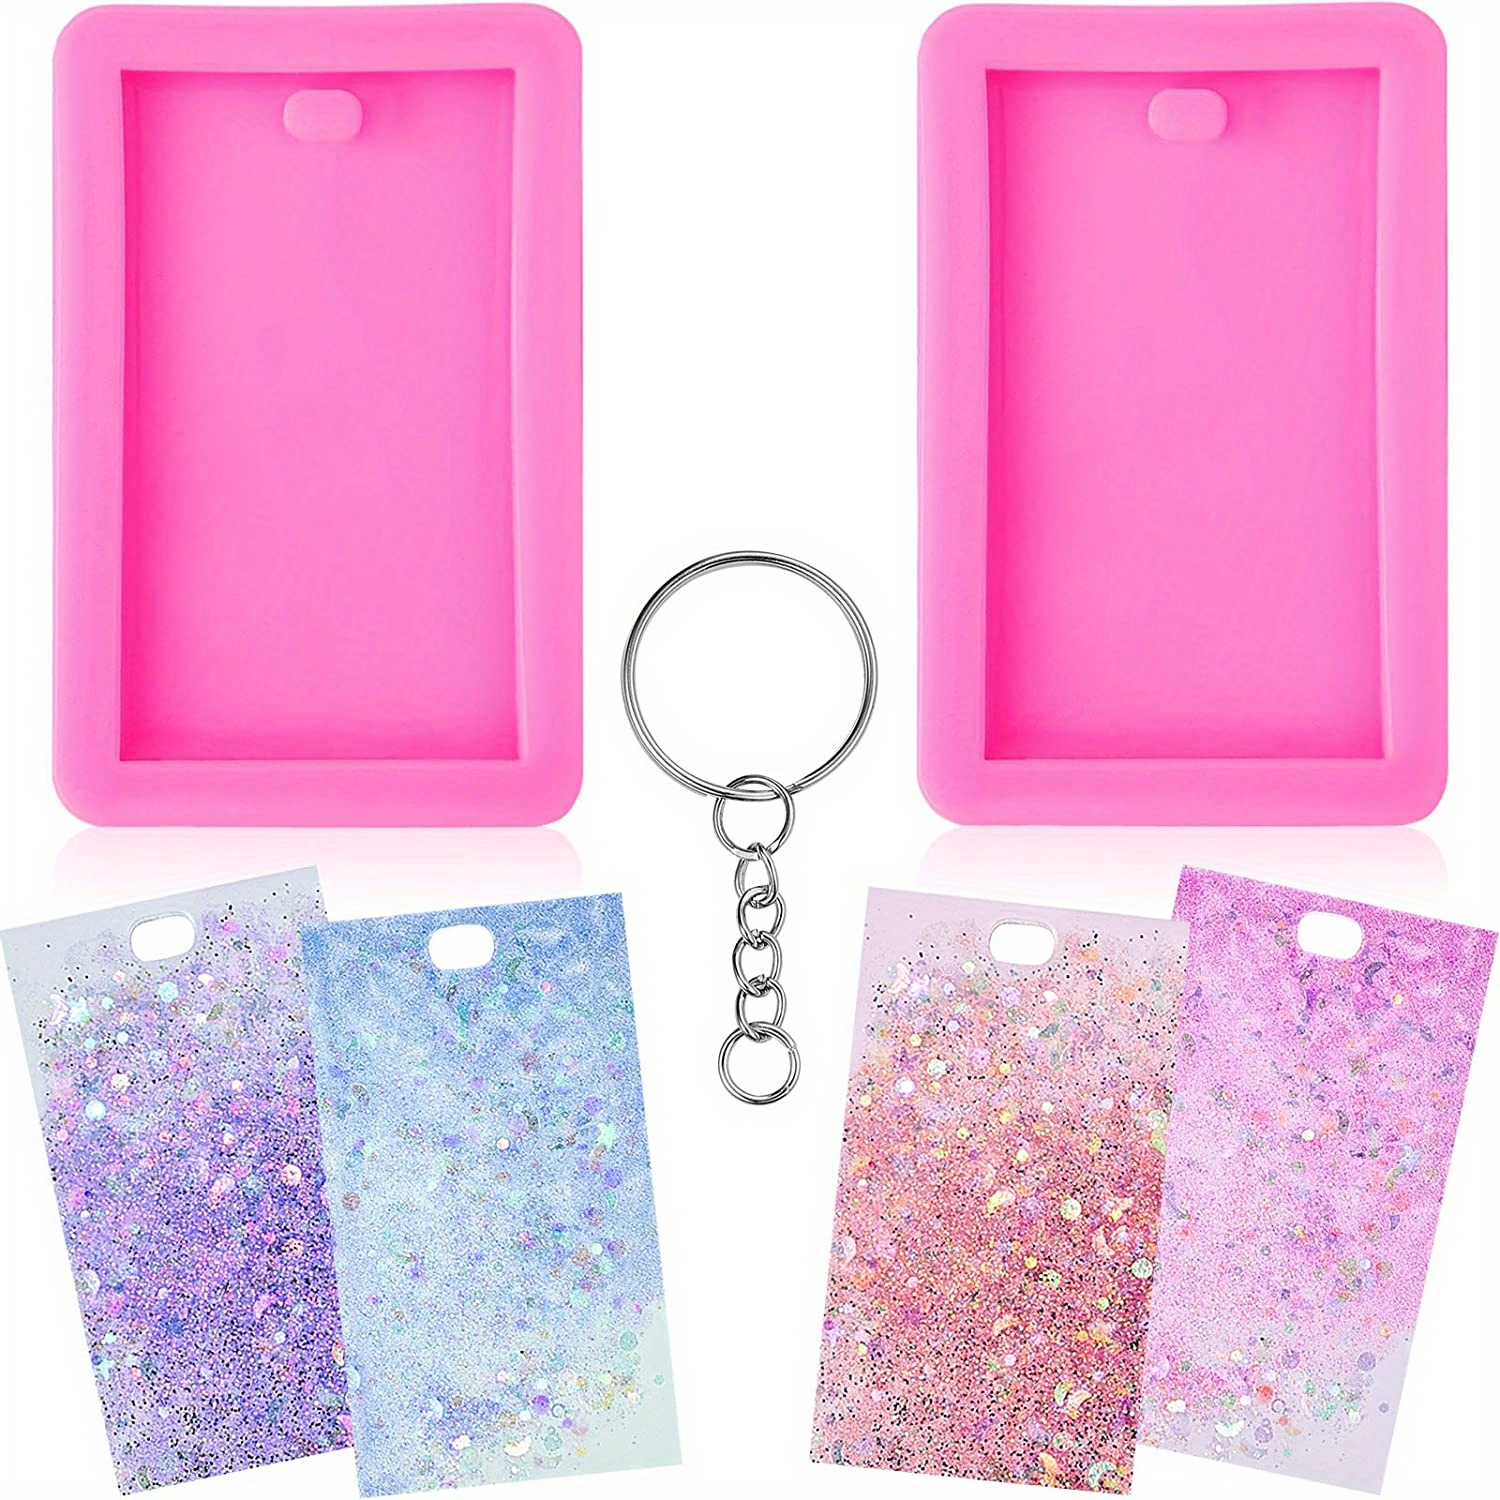 Resin Mold DIY Rectangle Mold Silicone Mold for Epoxy Resin Casting  Keychain Jewelry Mold Rectangle Silicone molds for Baking/soap Rectangle  Silicone